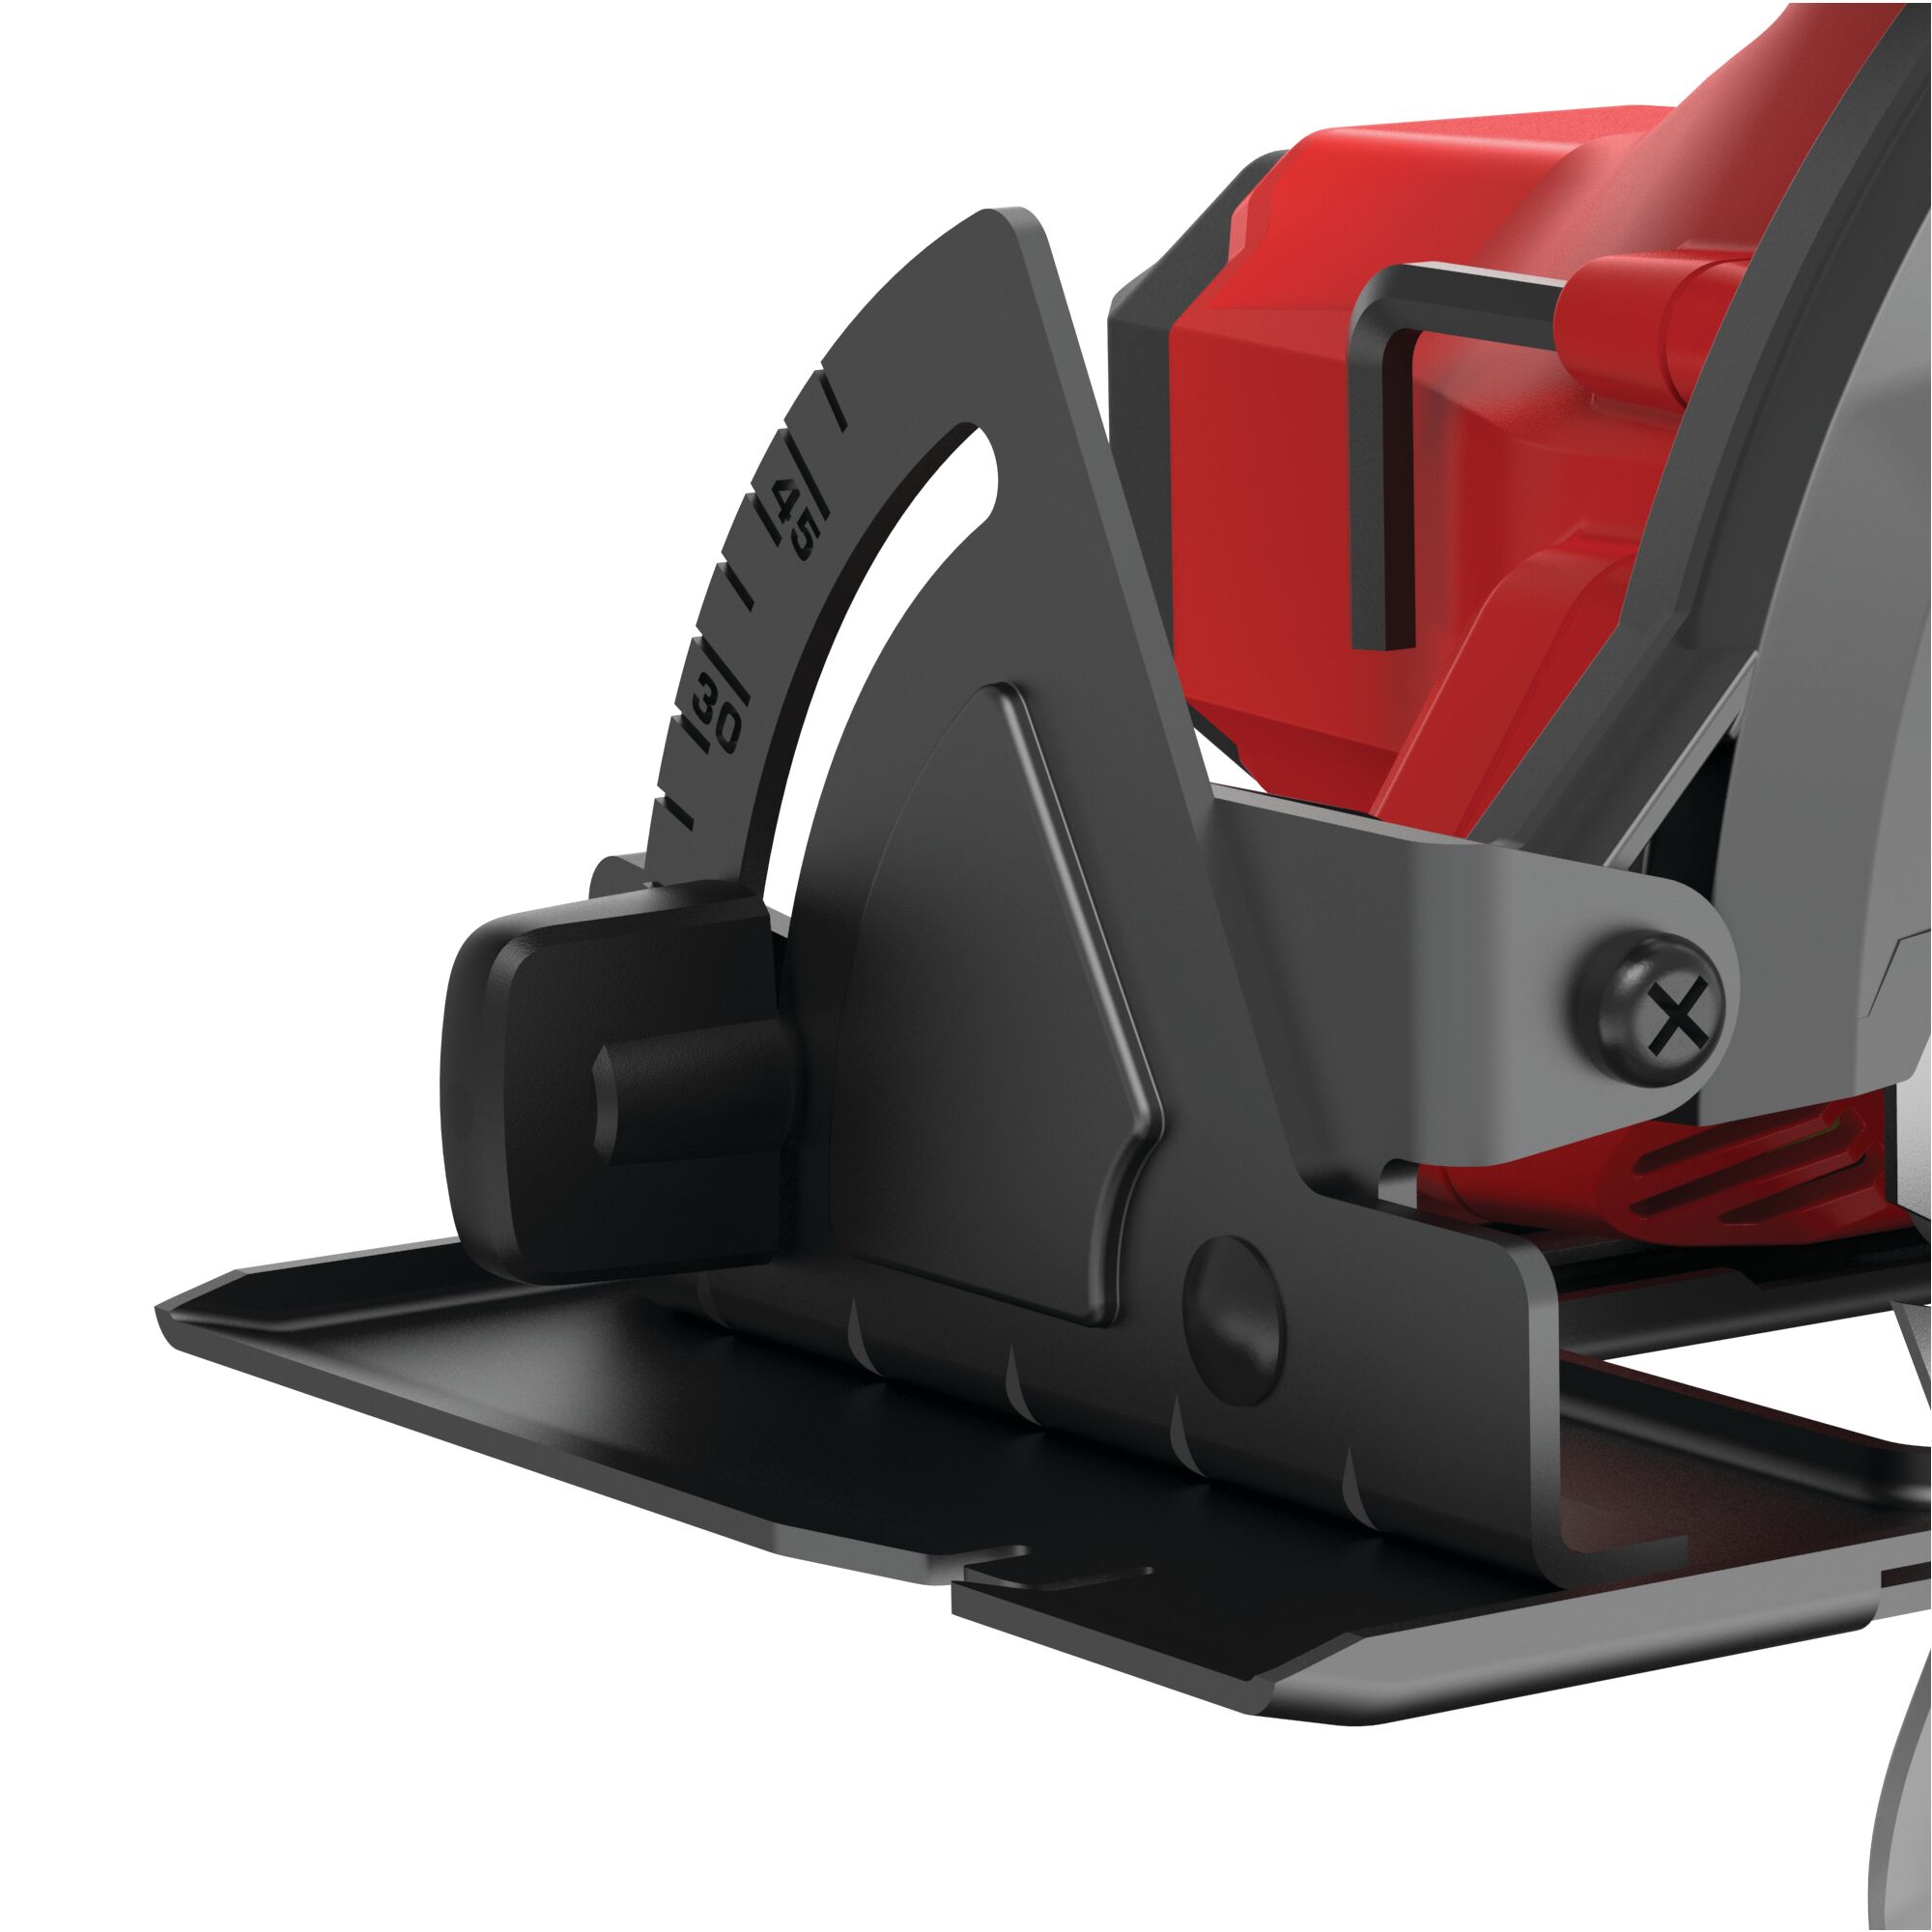 Beveling shoe for angled cuts feature of 20 volt cordless 6 1 half inch circular saw kit.